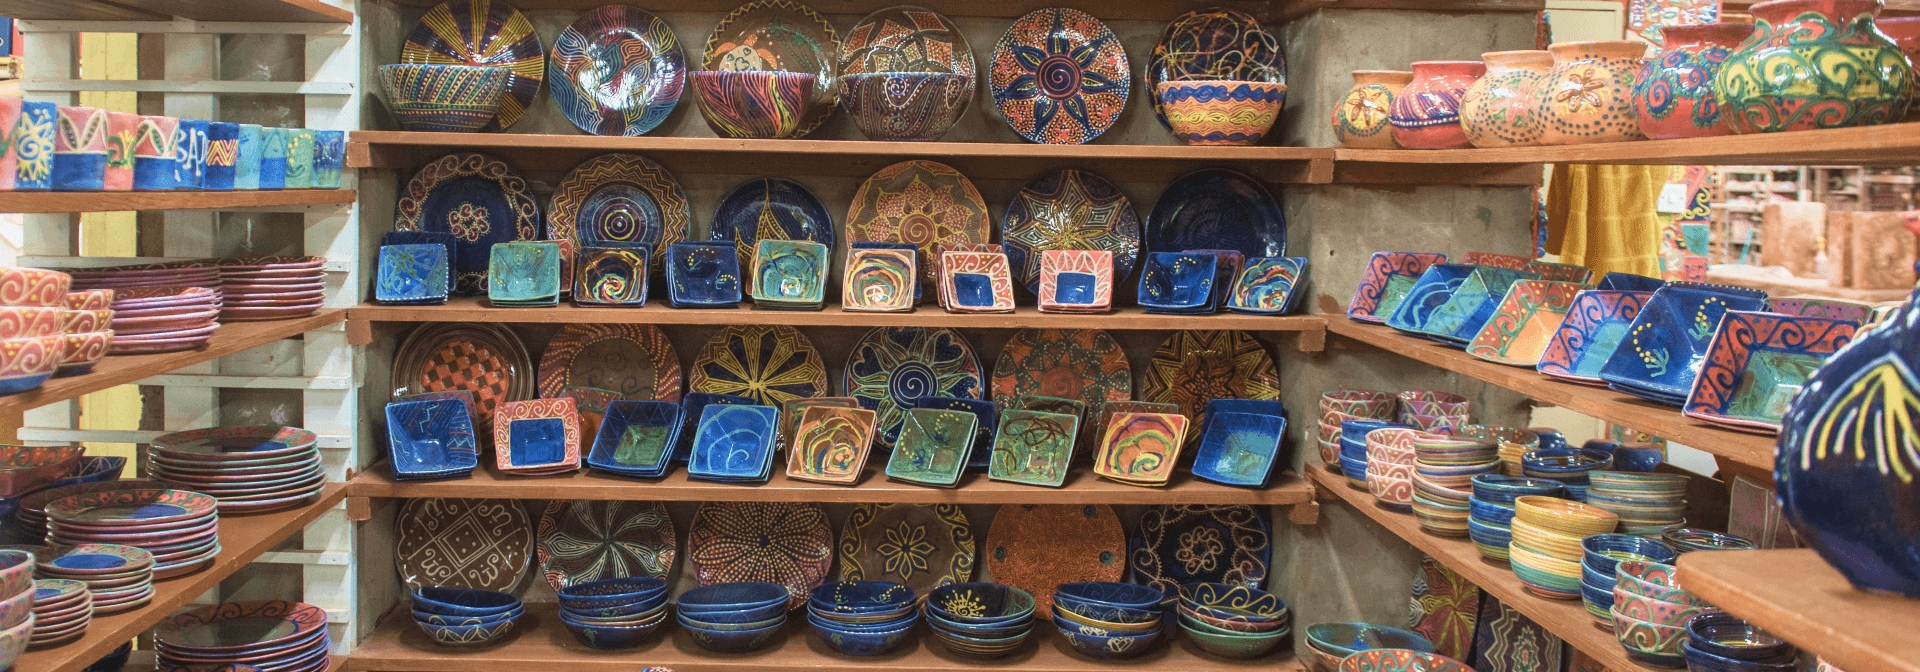 Wide array of ceramic pottery on the shelves at Earthworks Pottery in Barbados